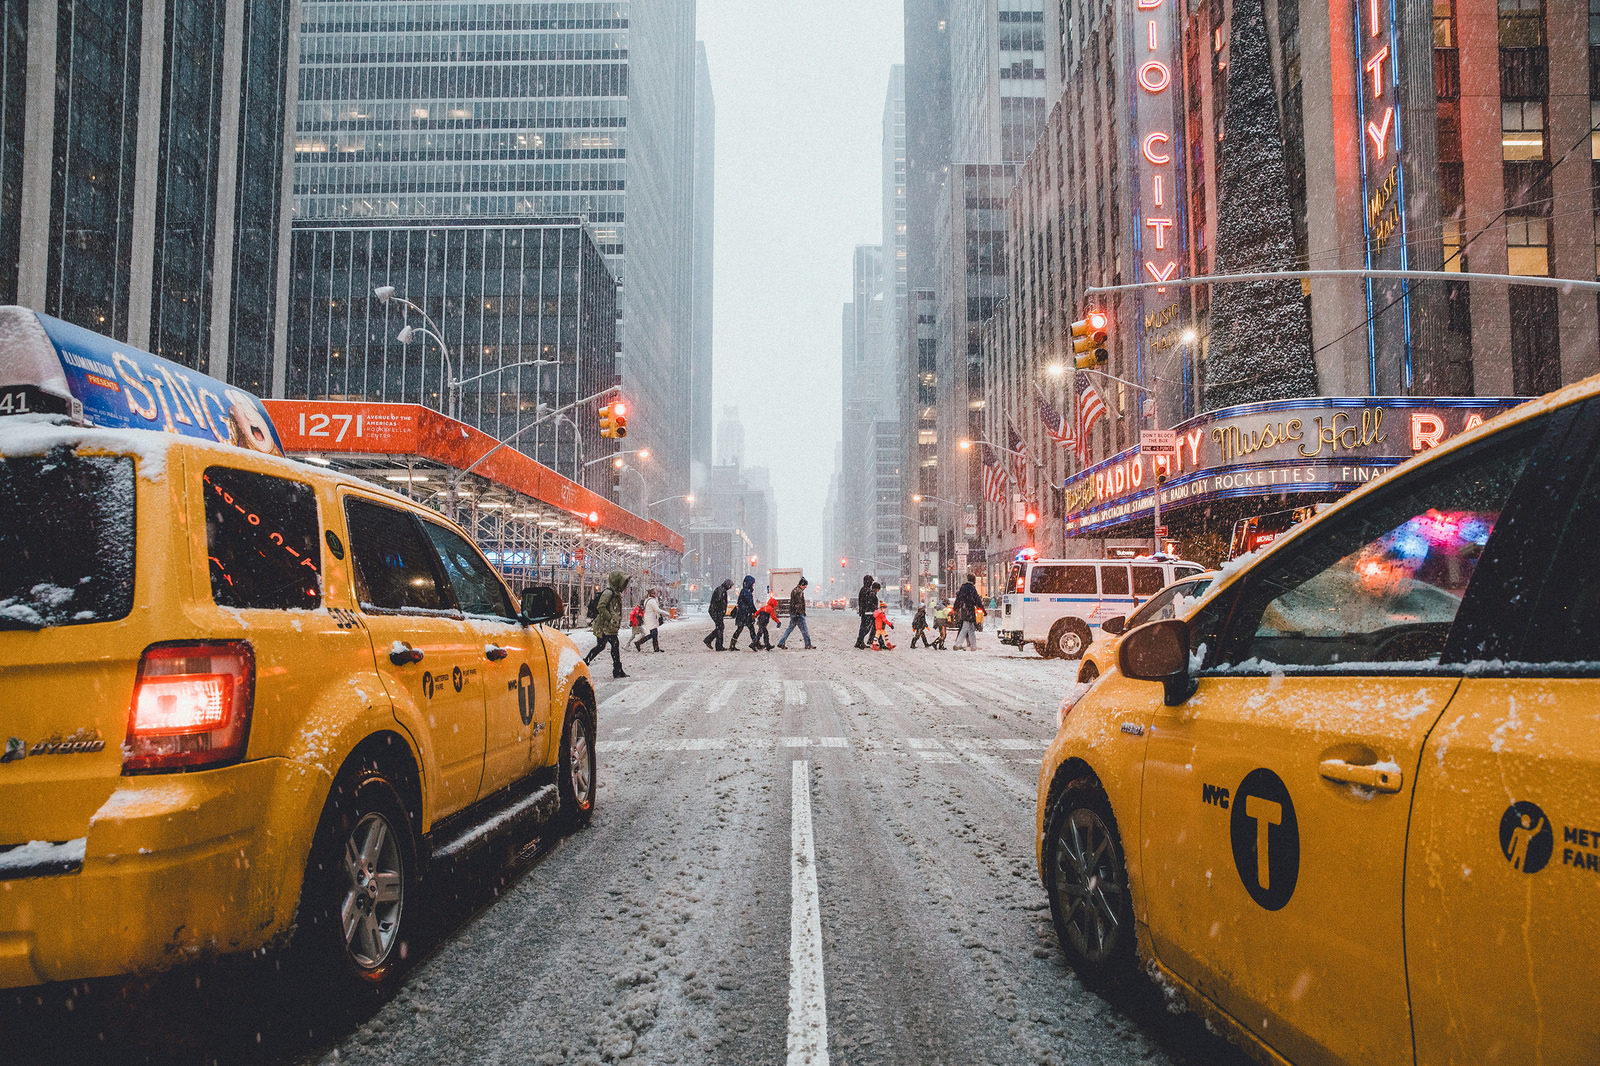 SamAlive Outdoors Street Building Snowing Landscape City New York City Car Taxi Traffic Lights 1600x1066